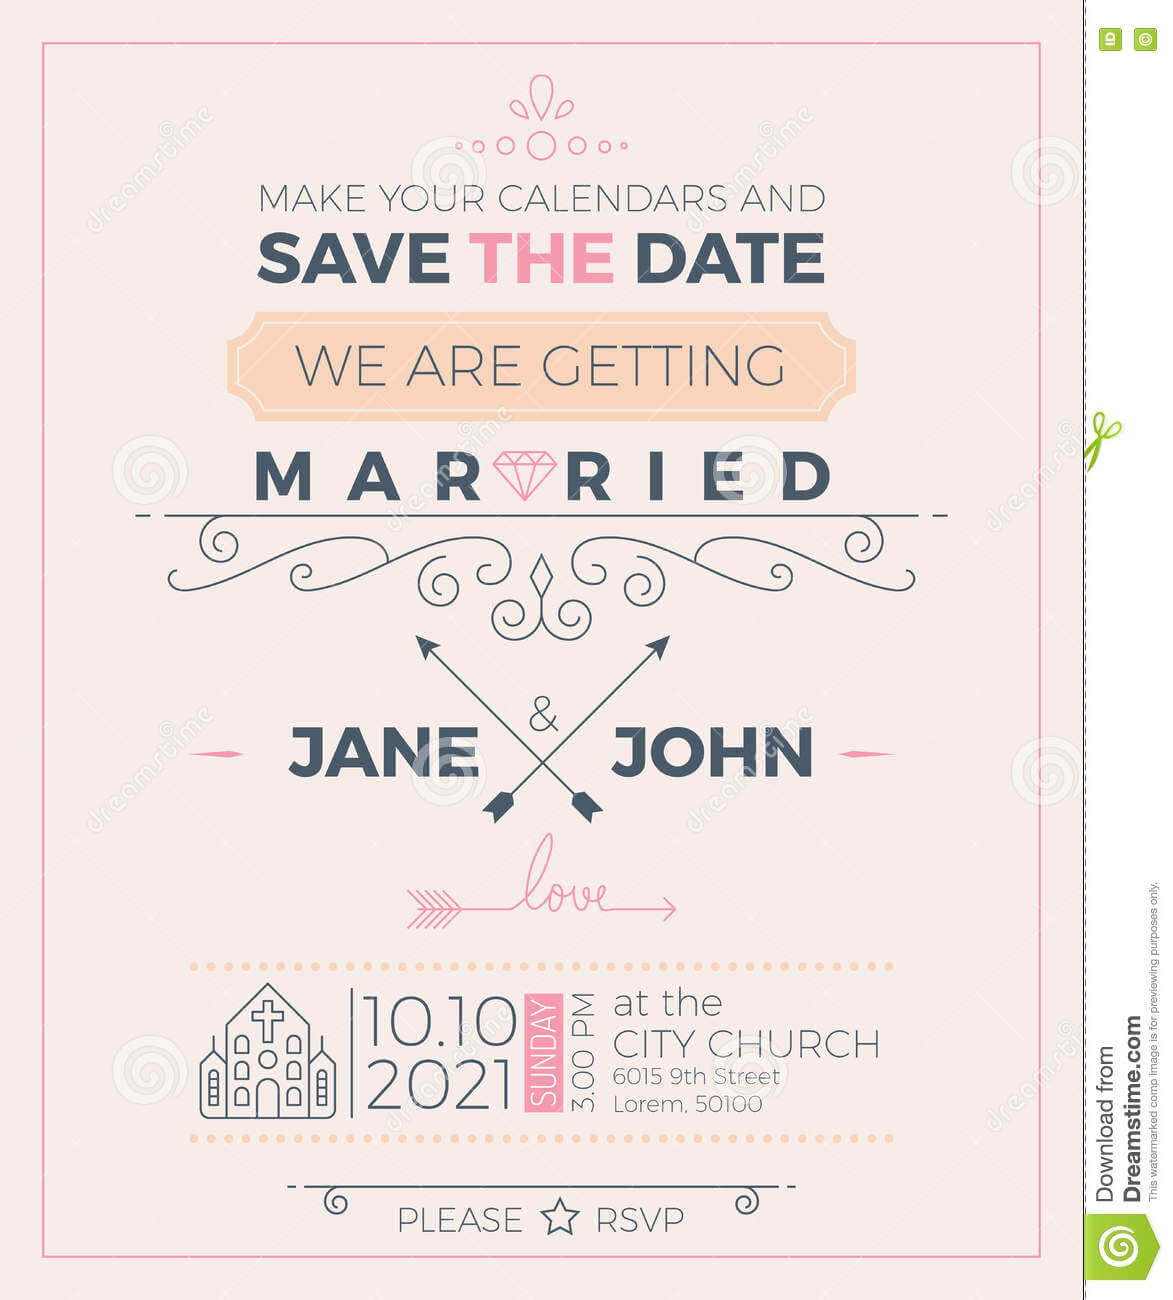 Vintage Wedding Invitation Card Template Stock Vector Intended For Church Wedding Invitation Card Template